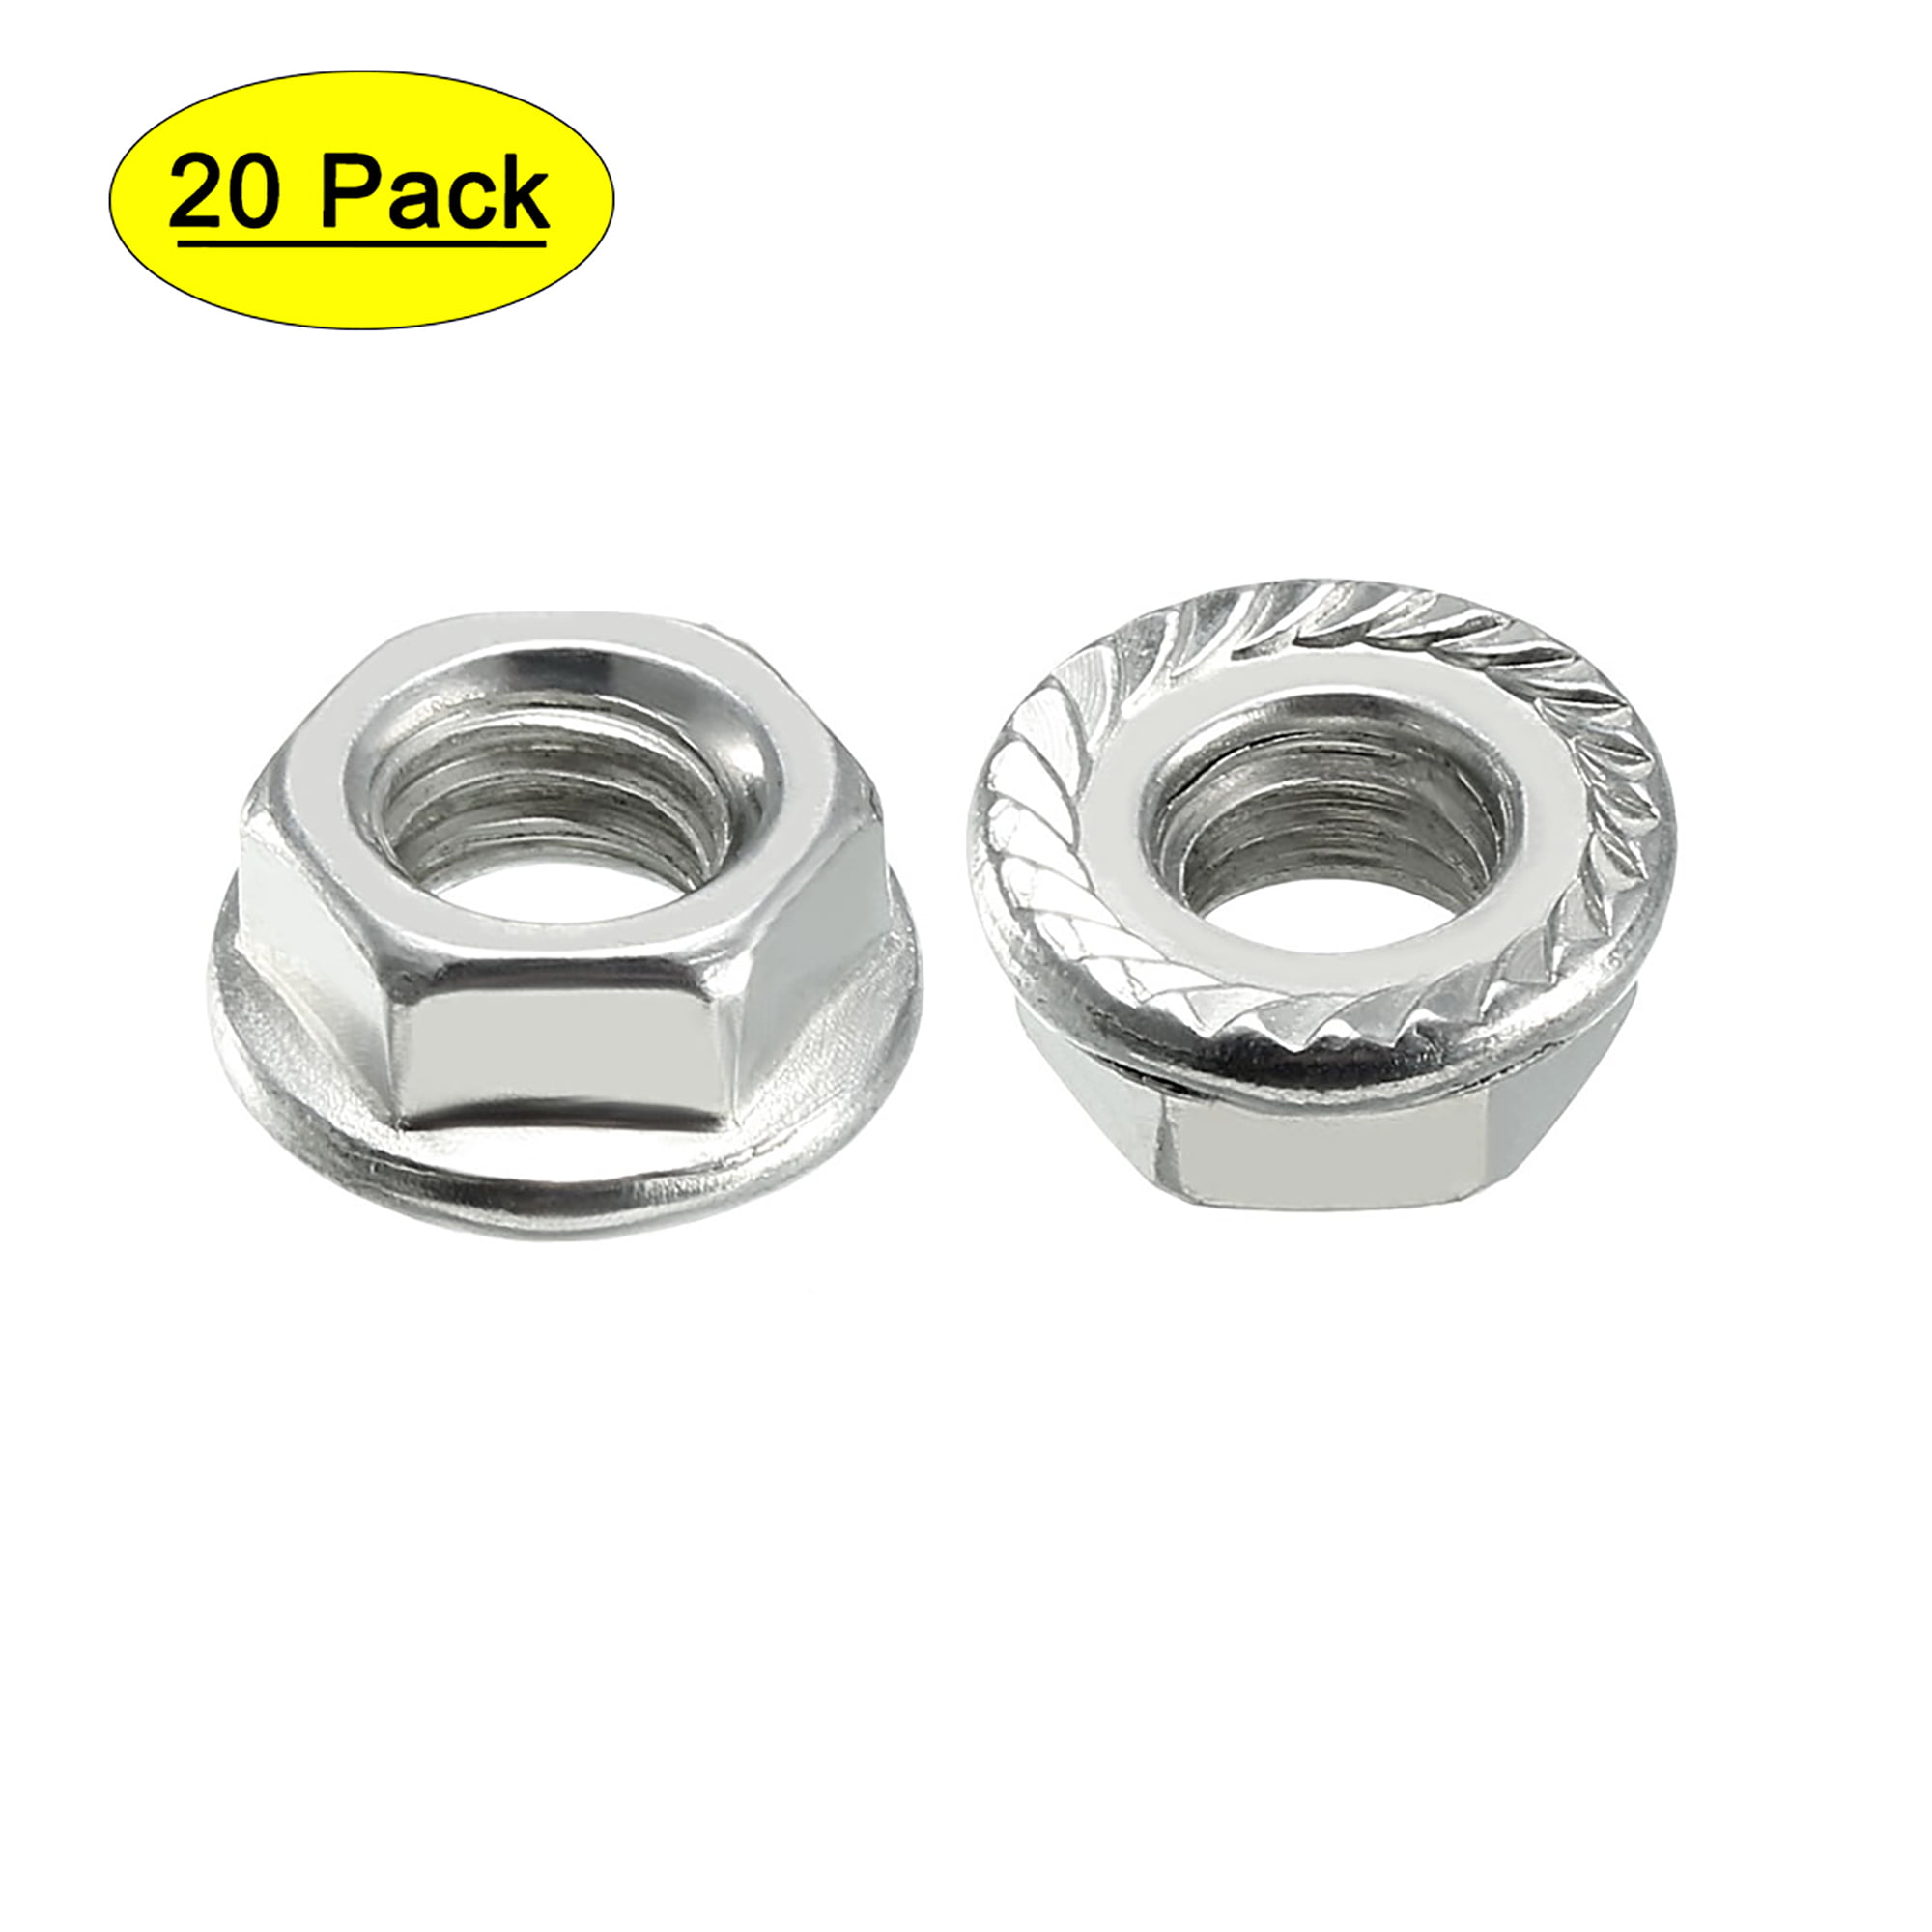 M12 Stainless Steel A2 Serrated Flange Flanged Nut 20 Pack